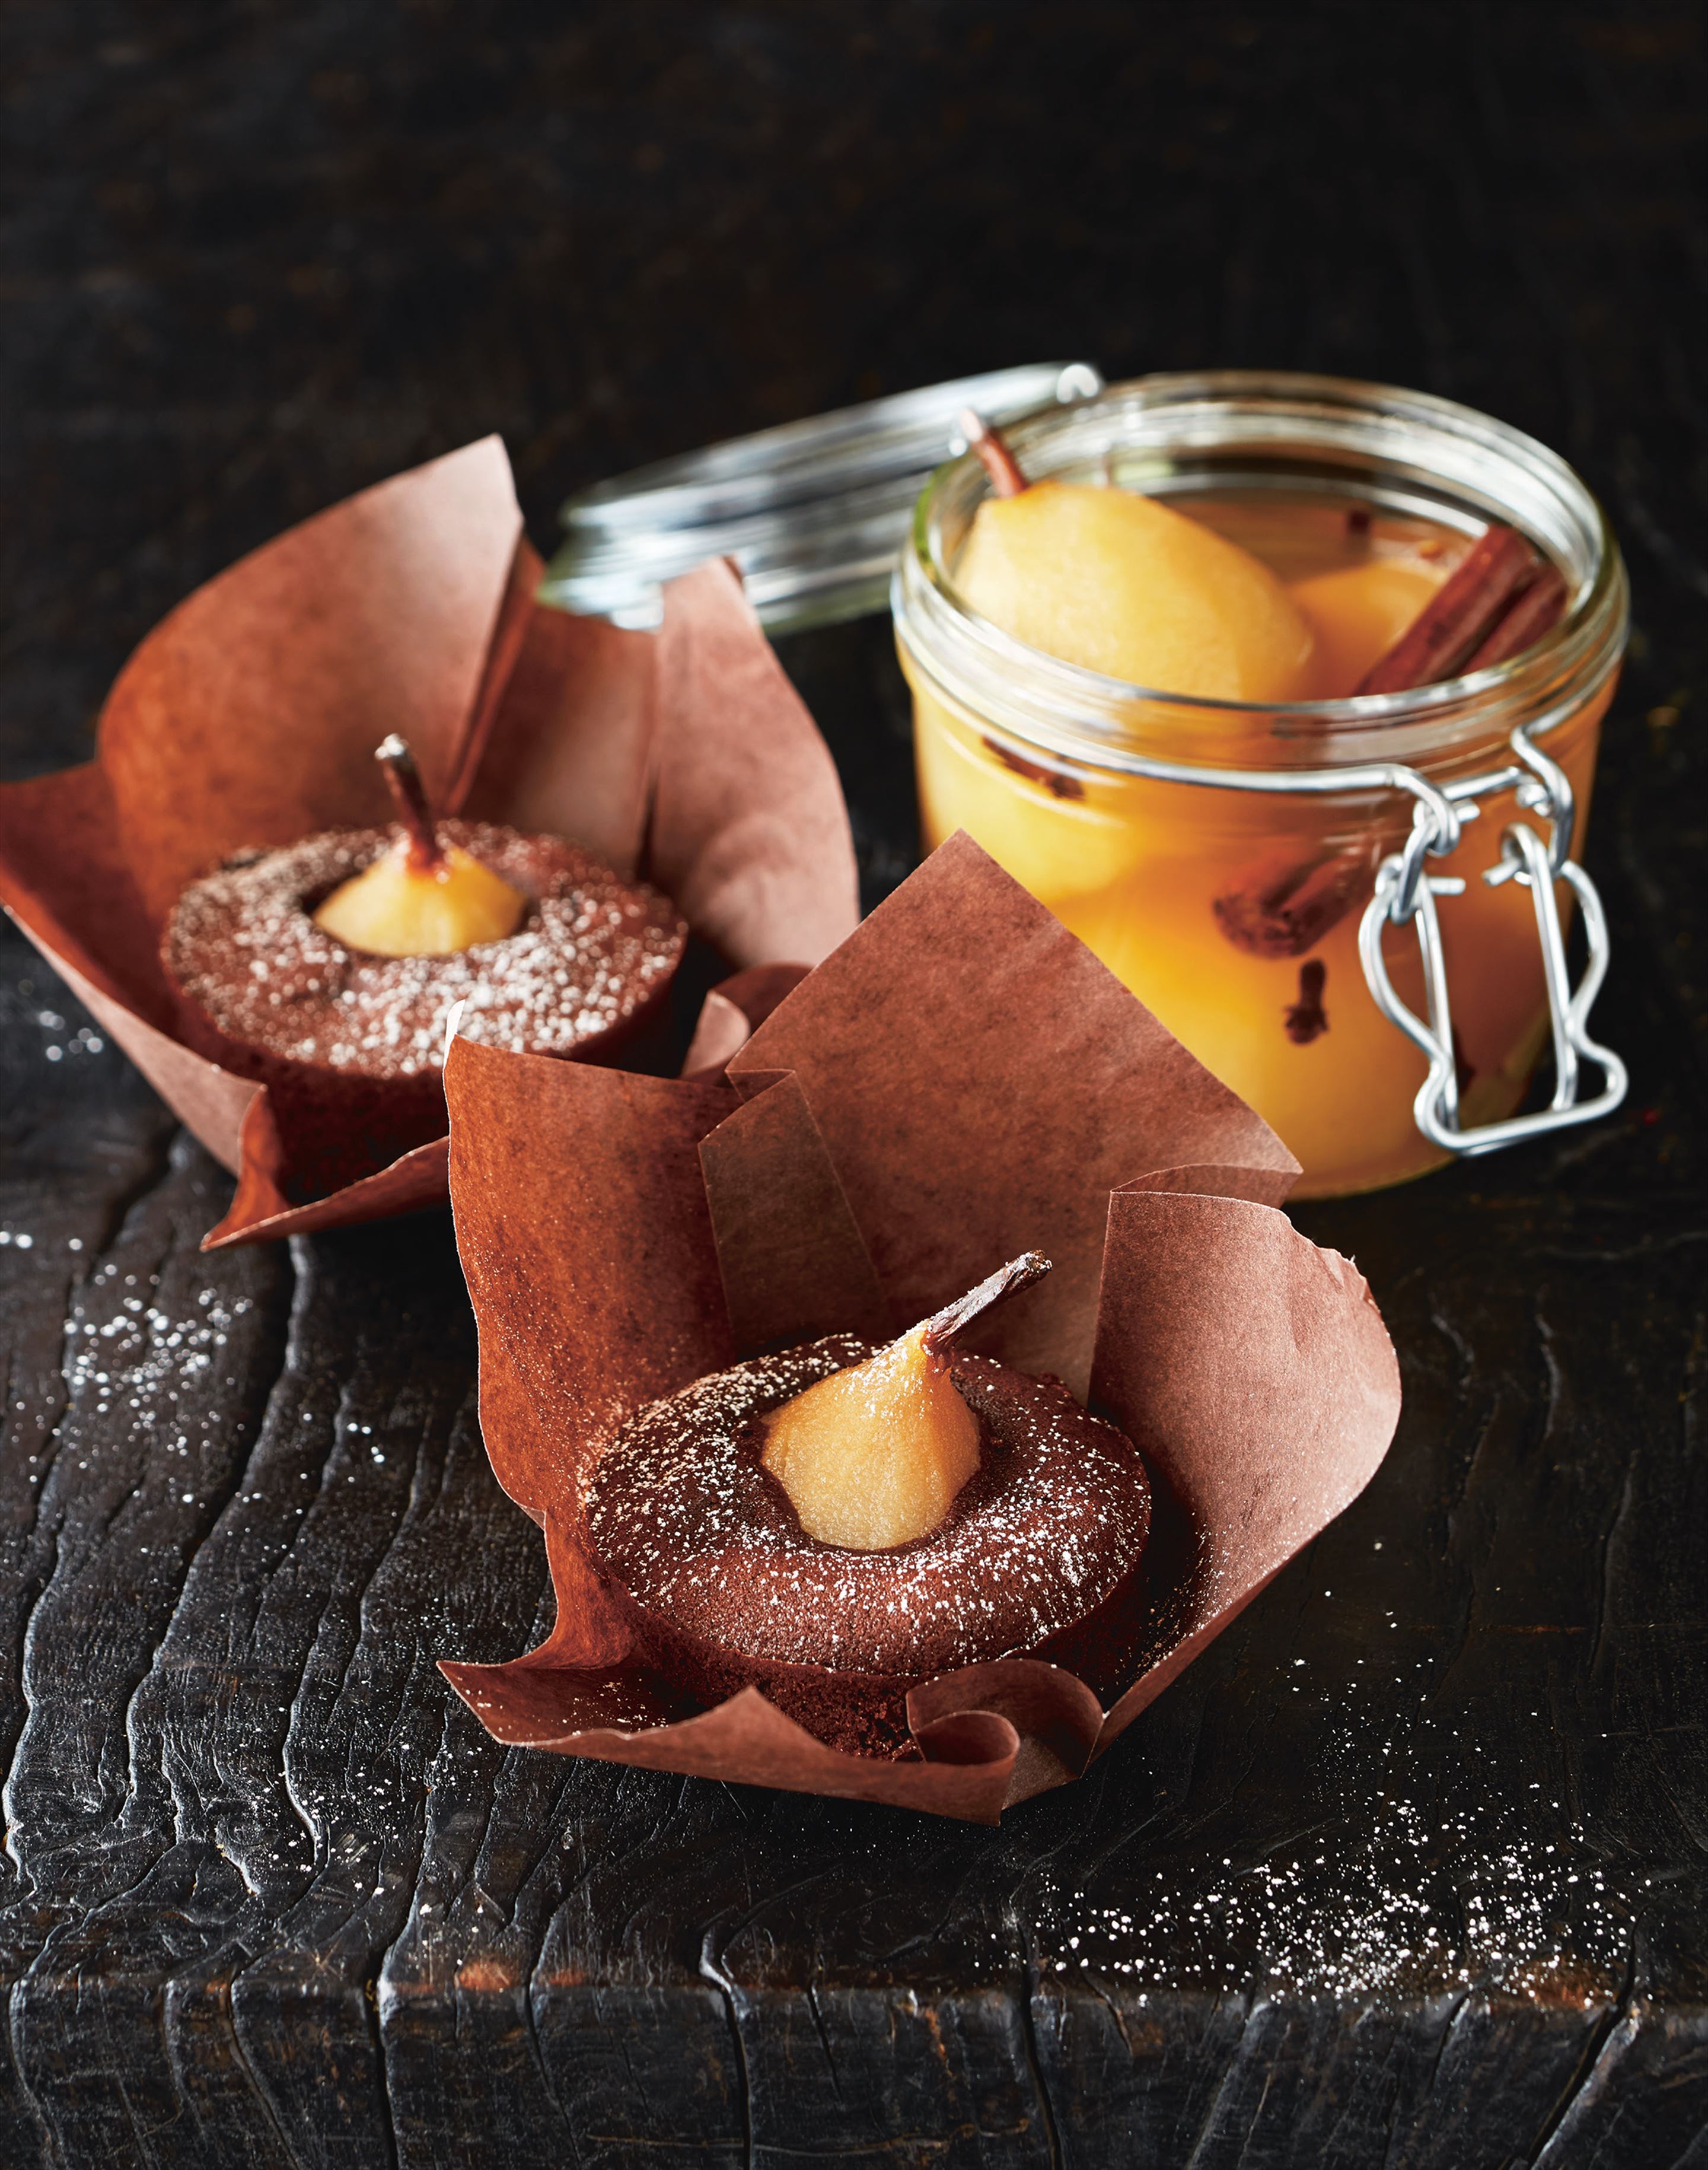 Spiced pear and chocolate cakes